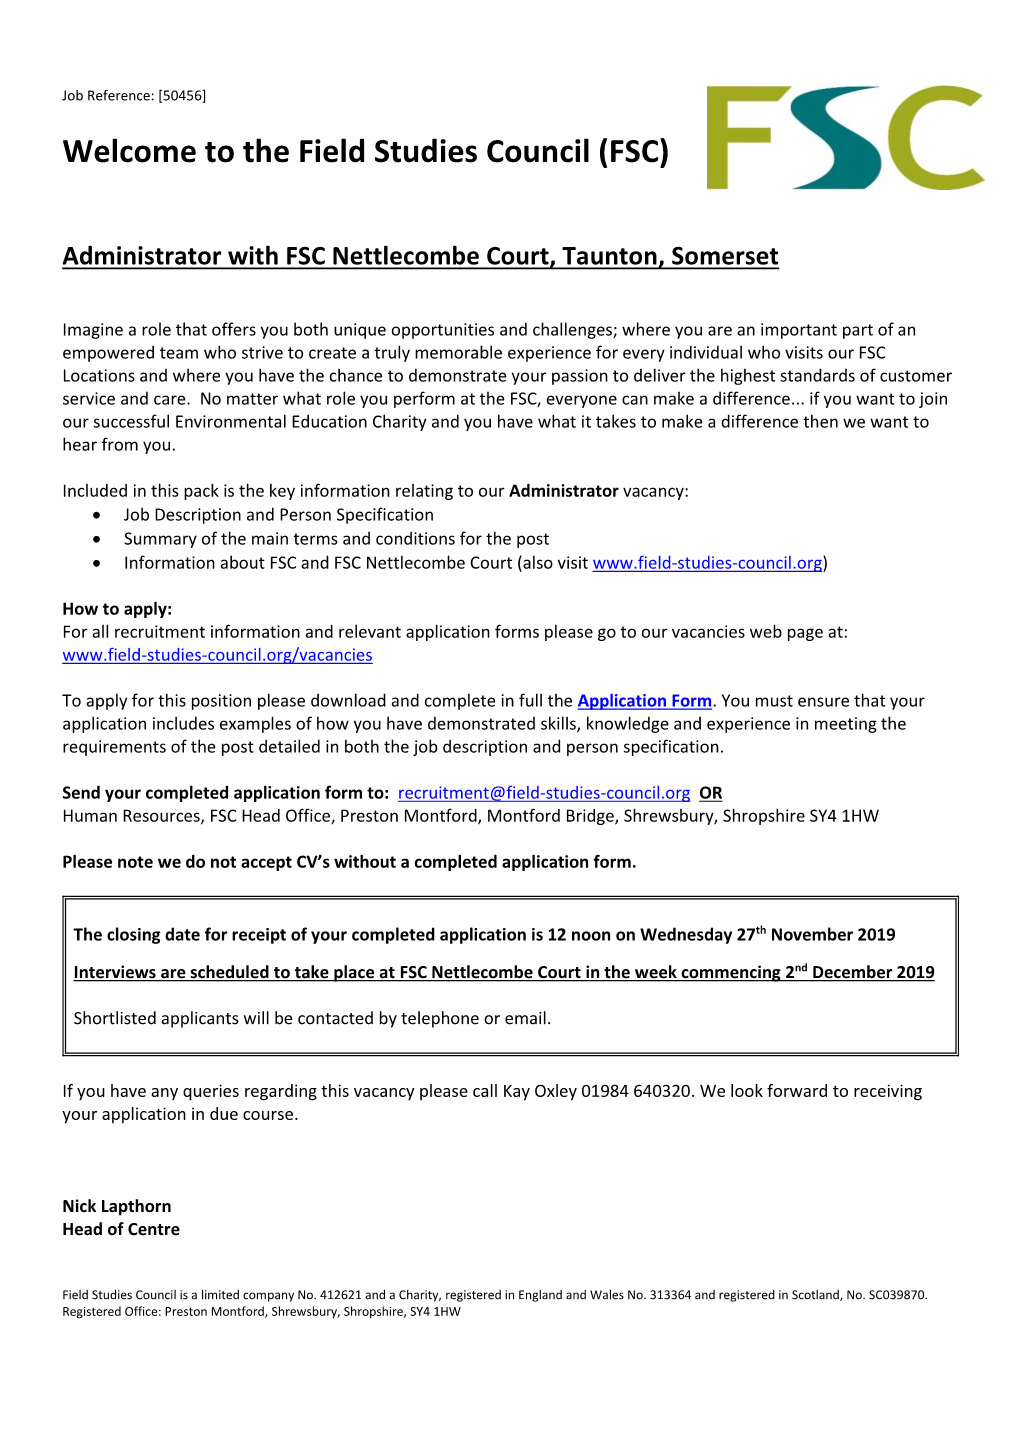 Administrator with FSC Nettlecombe Court, Taunton, Somerset